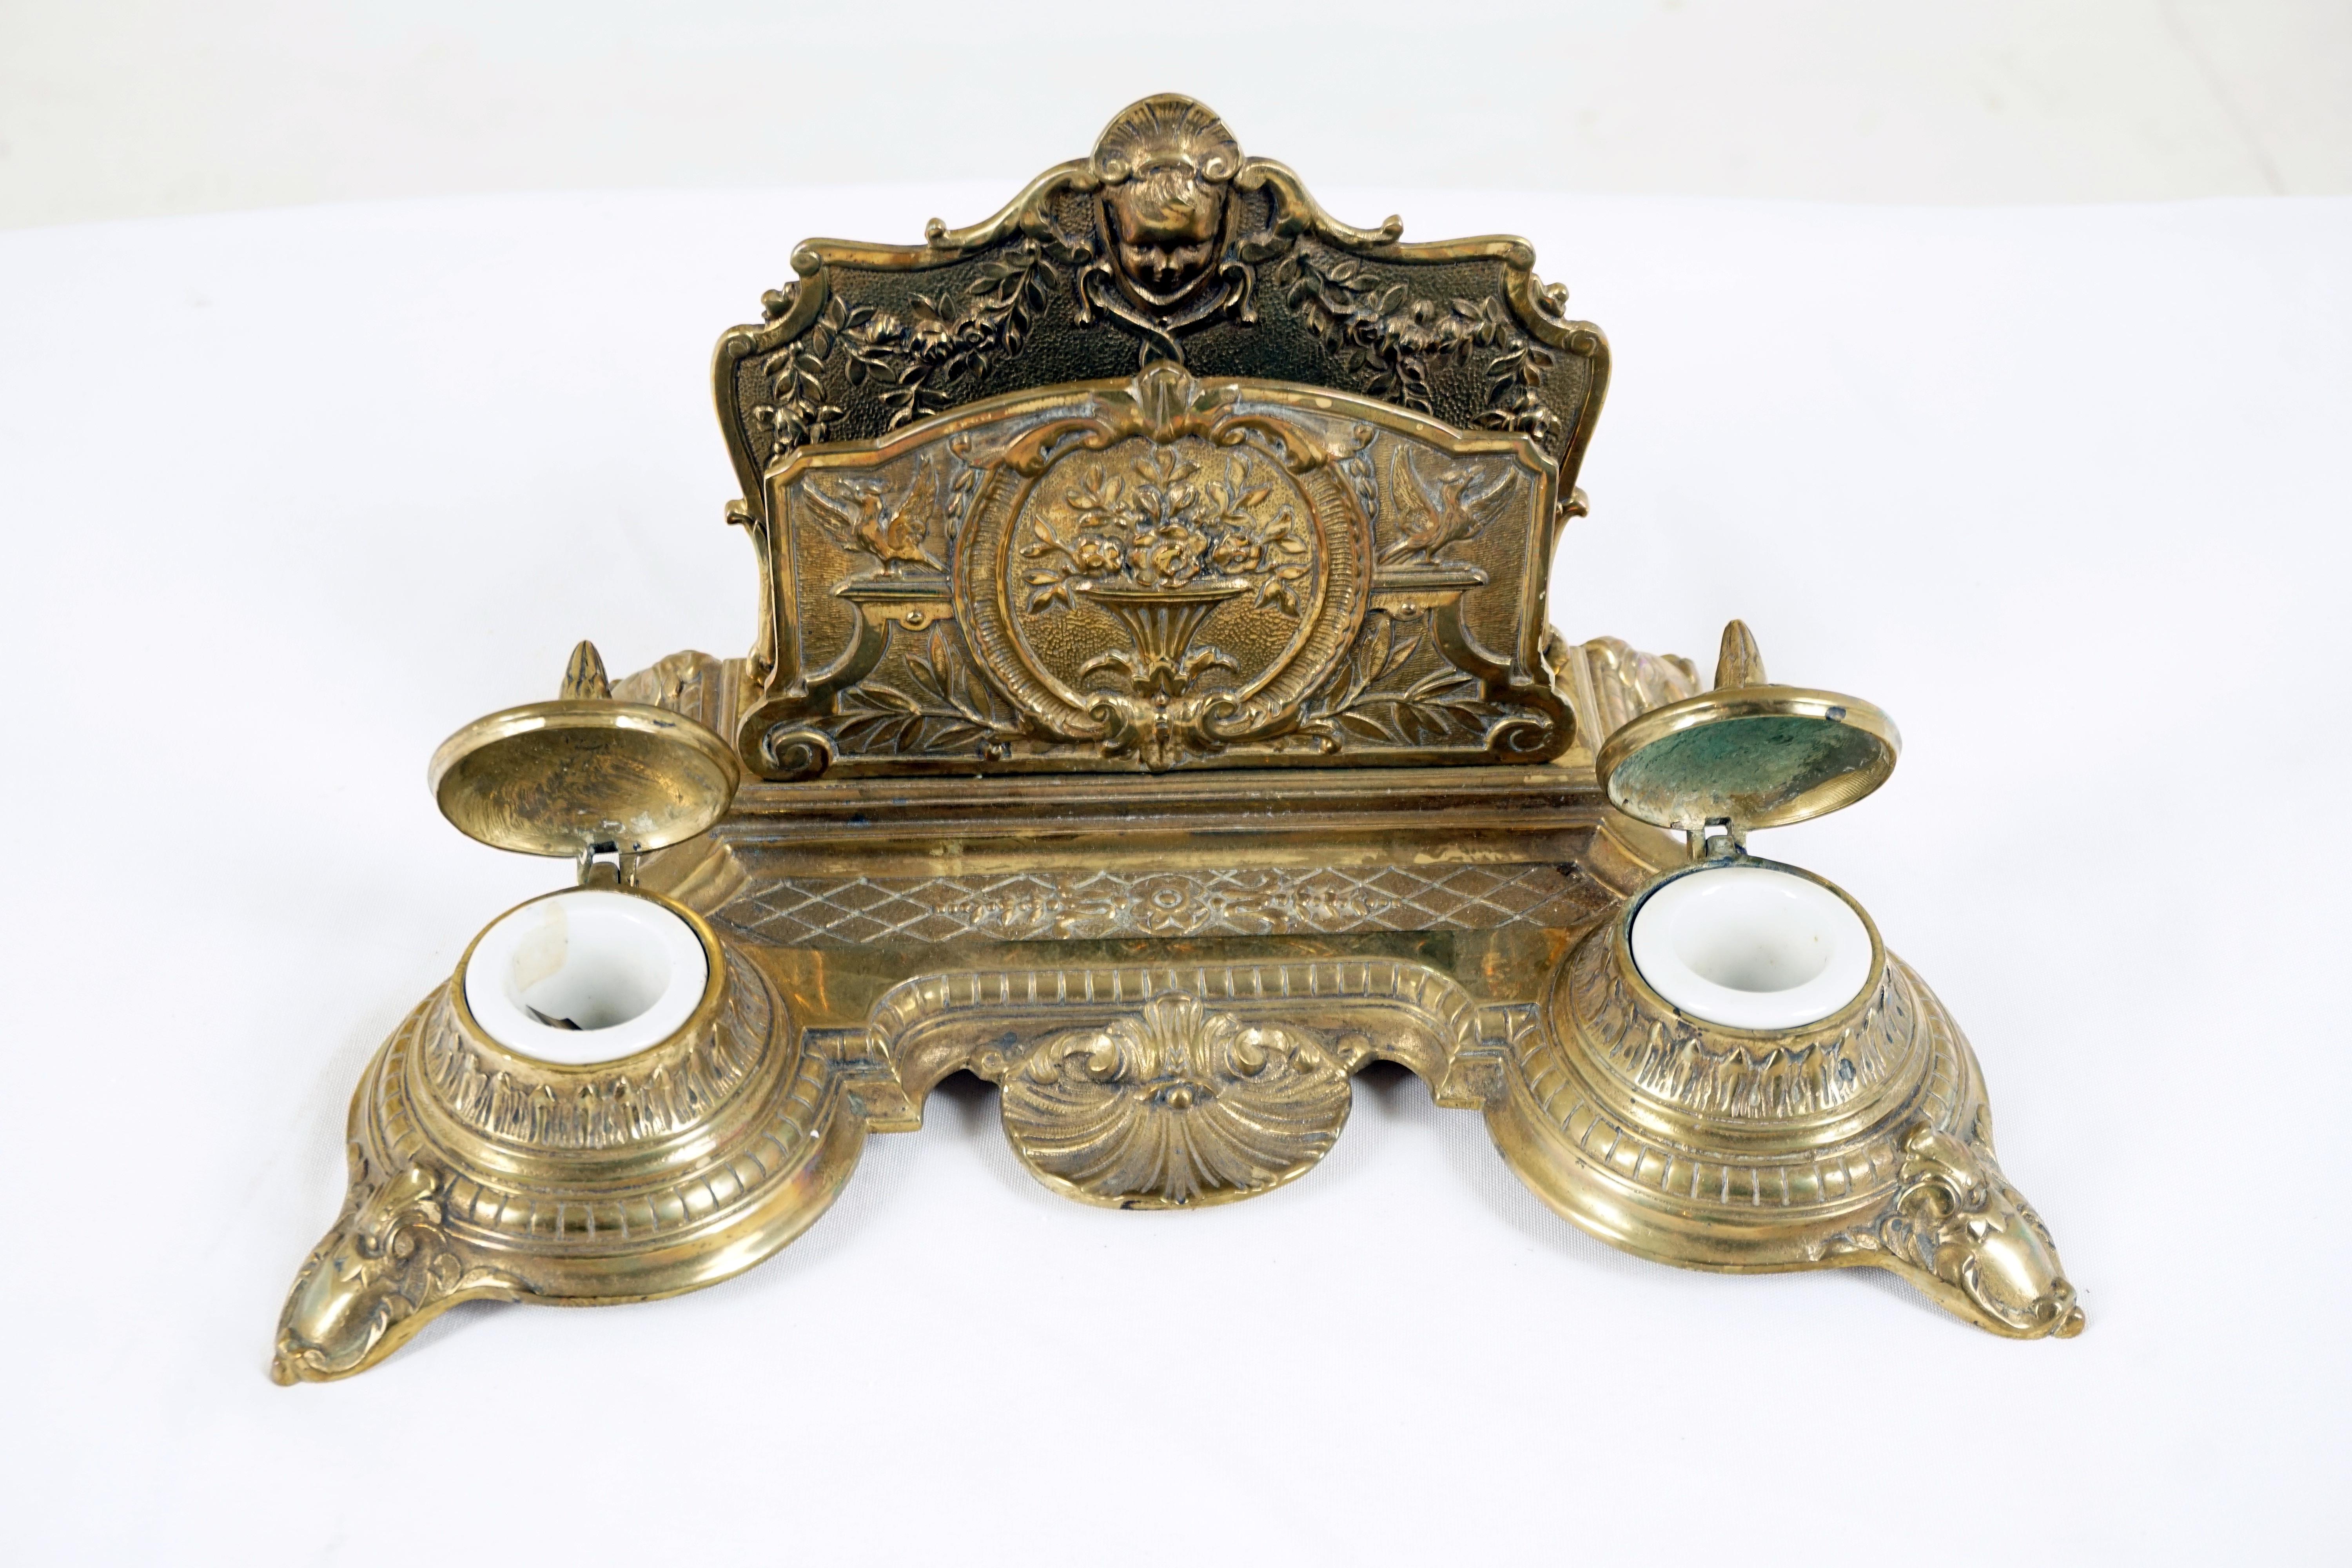 Antique Brass double inkstand, inkwell, desk set, Scotland 1910, H526

Scotland 1910
Solid brass
With letter holder to the back
Pen holder to the back
Pair of brass inkwells with lids having ceramic inserts
All standing on four carved feet
Marked